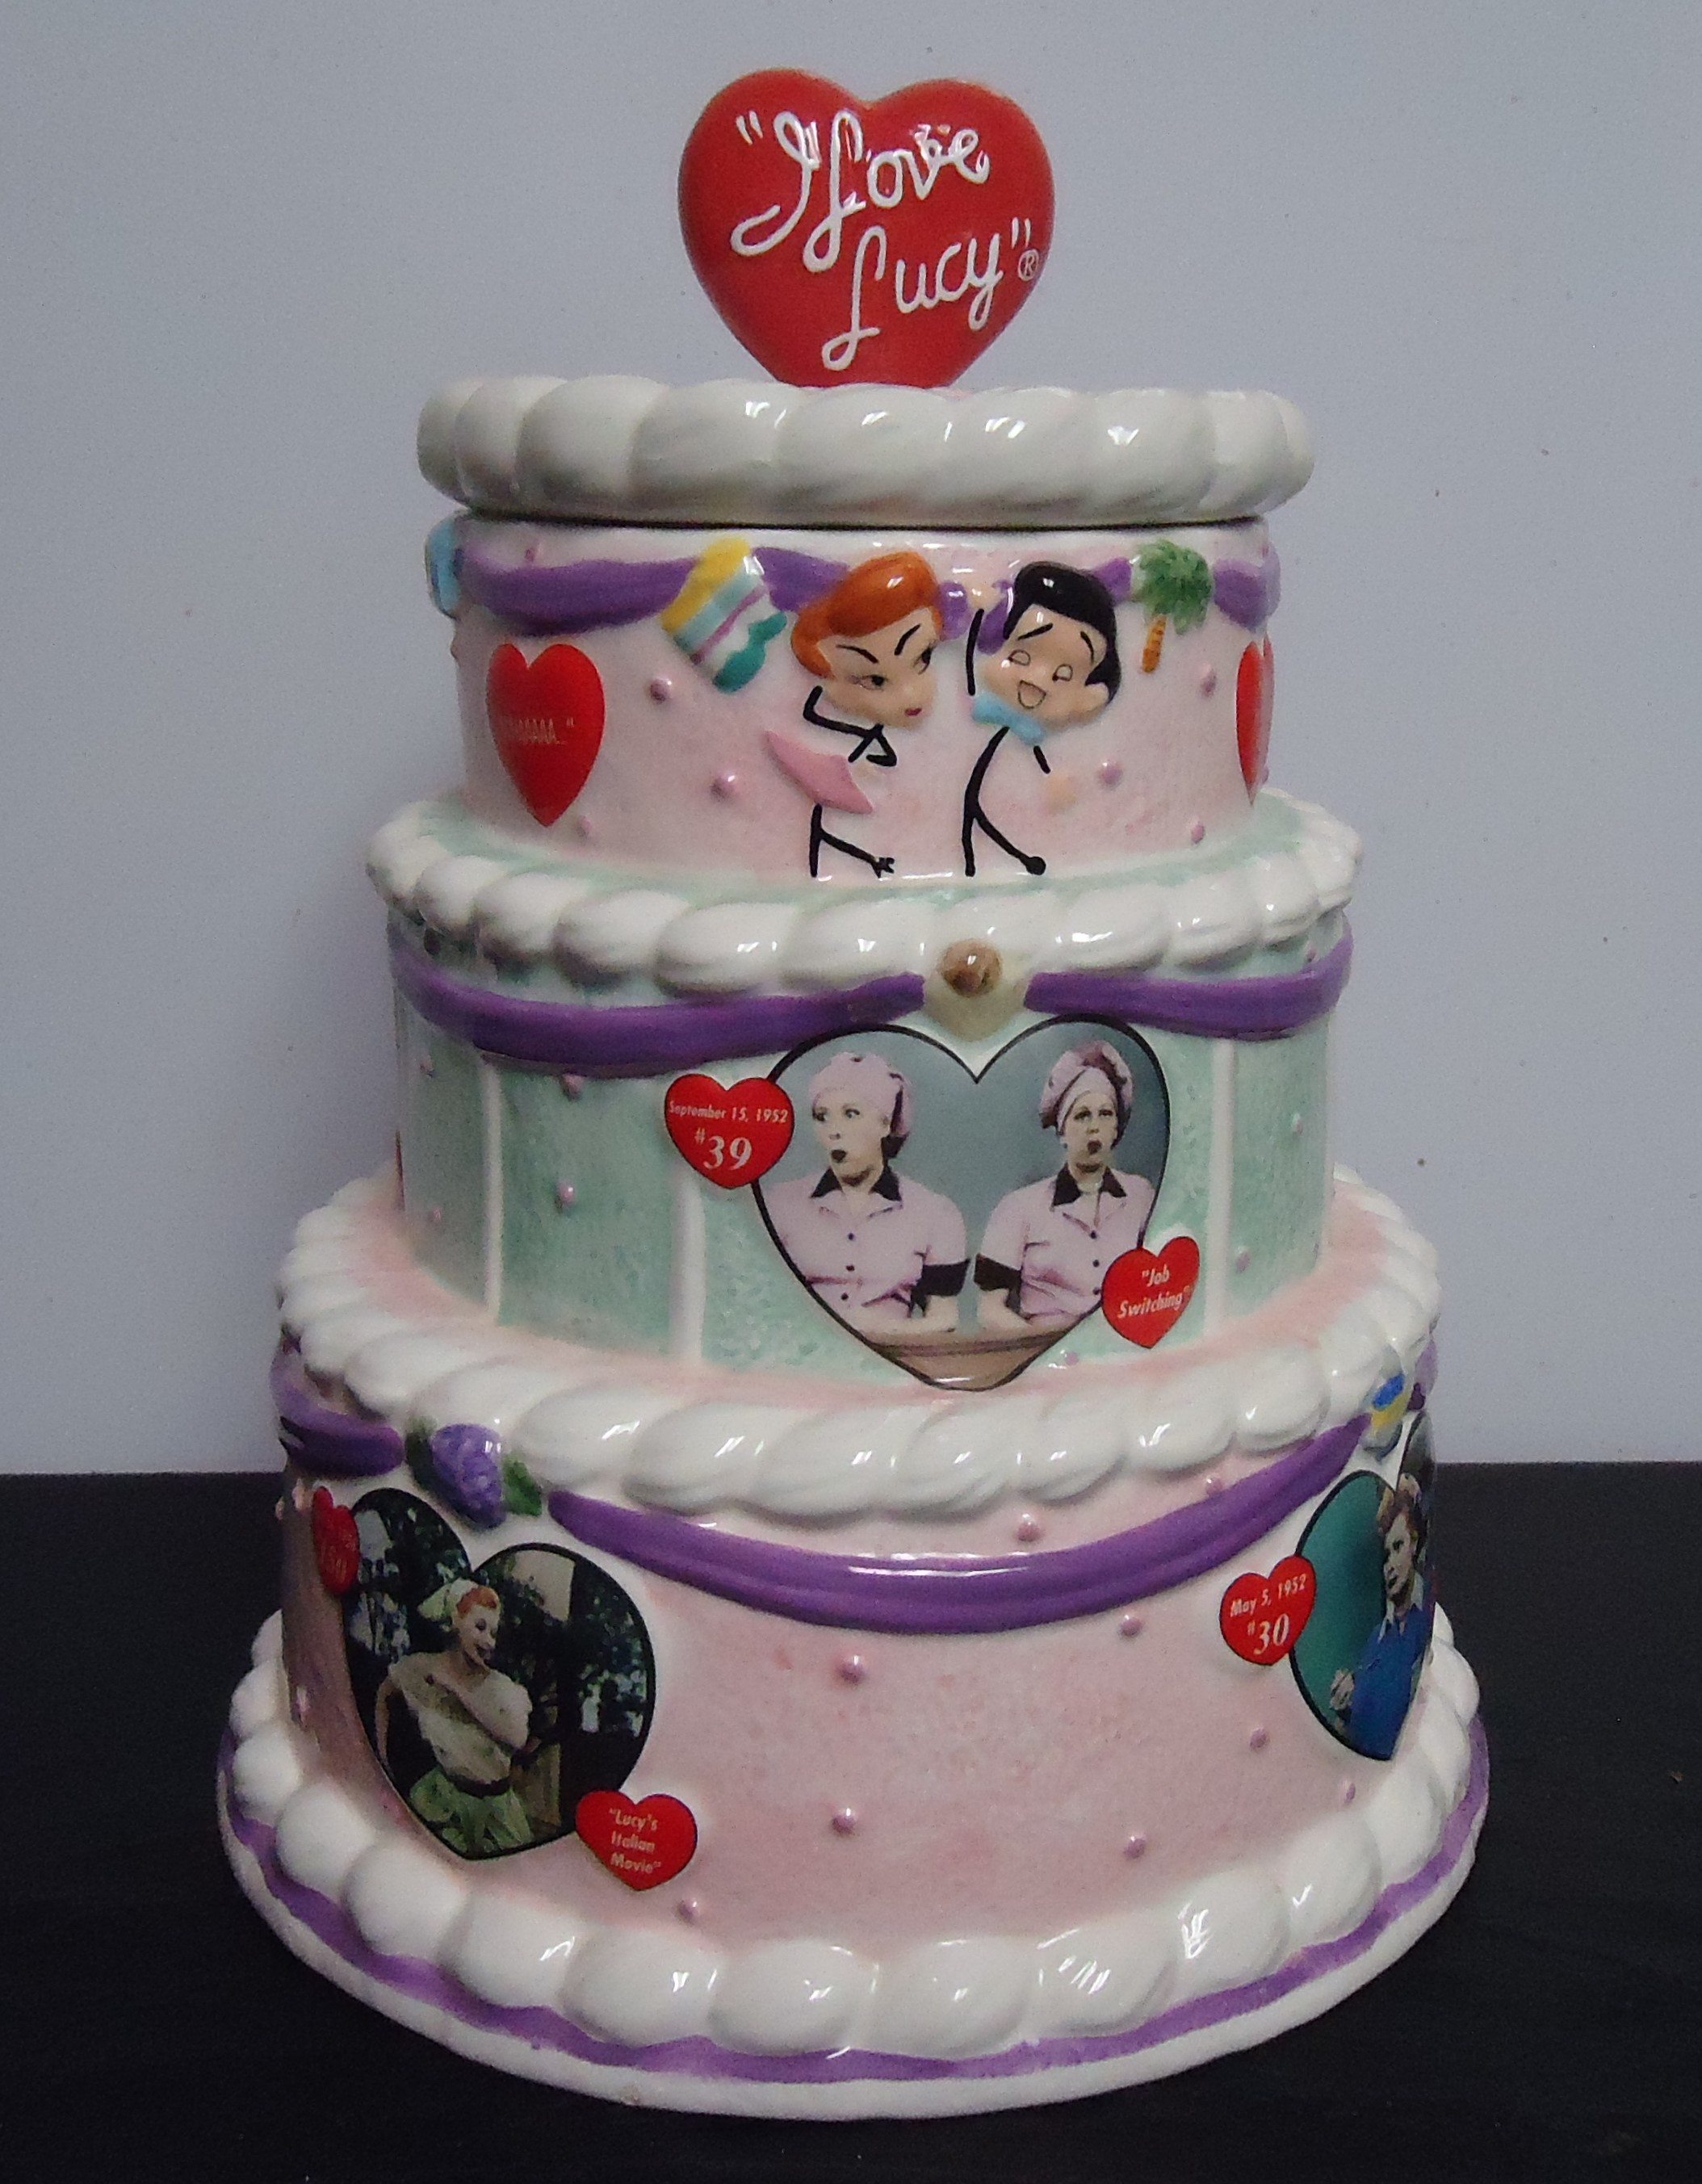 (16)  "Limited Edition" I Love Lucy
Cookie Jar
$135.00